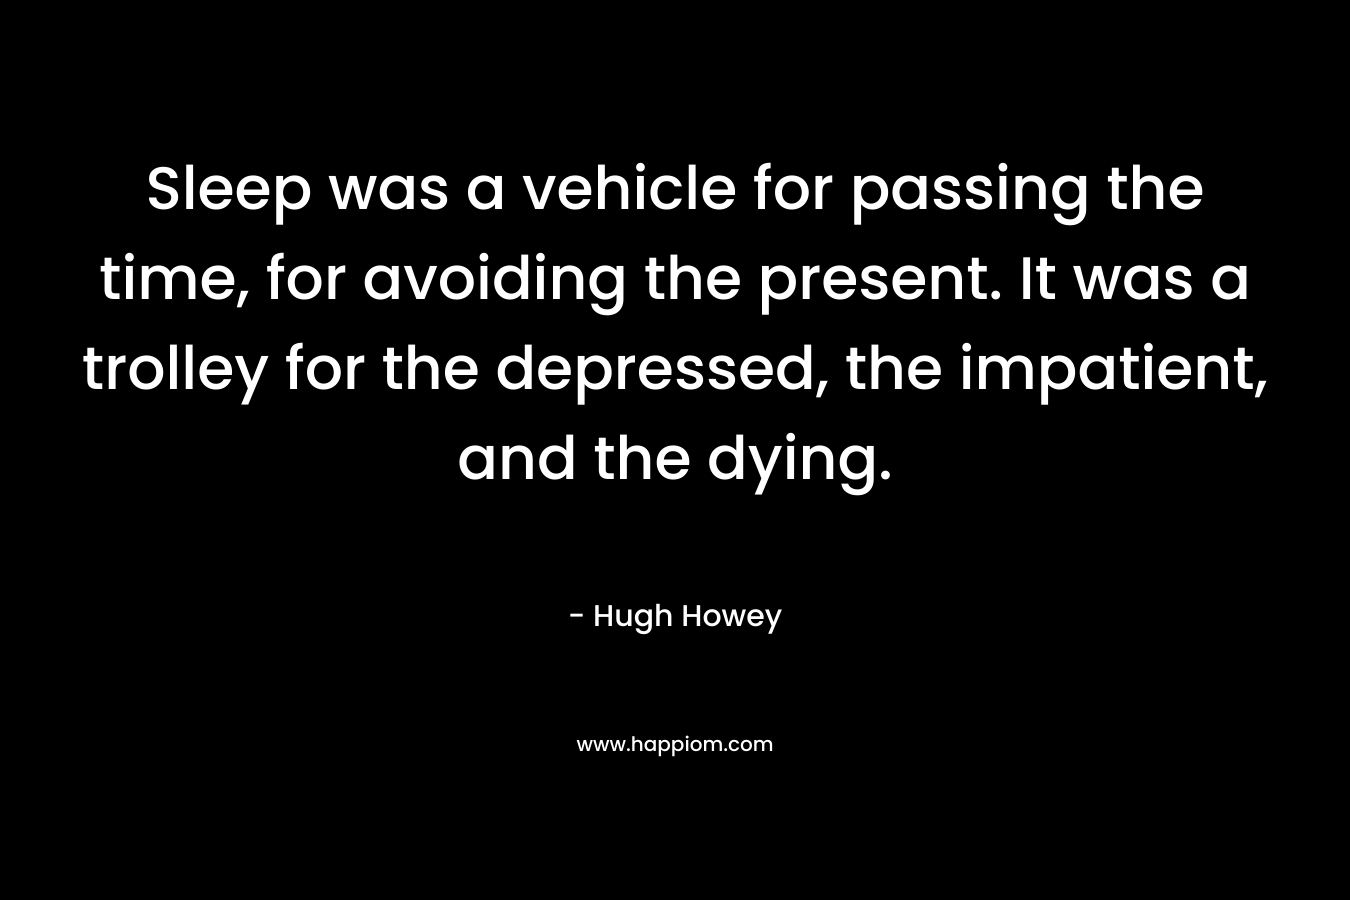 Sleep was a vehicle for passing the time, for avoiding the present. It was a trolley for the depressed, the impatient, and the dying.